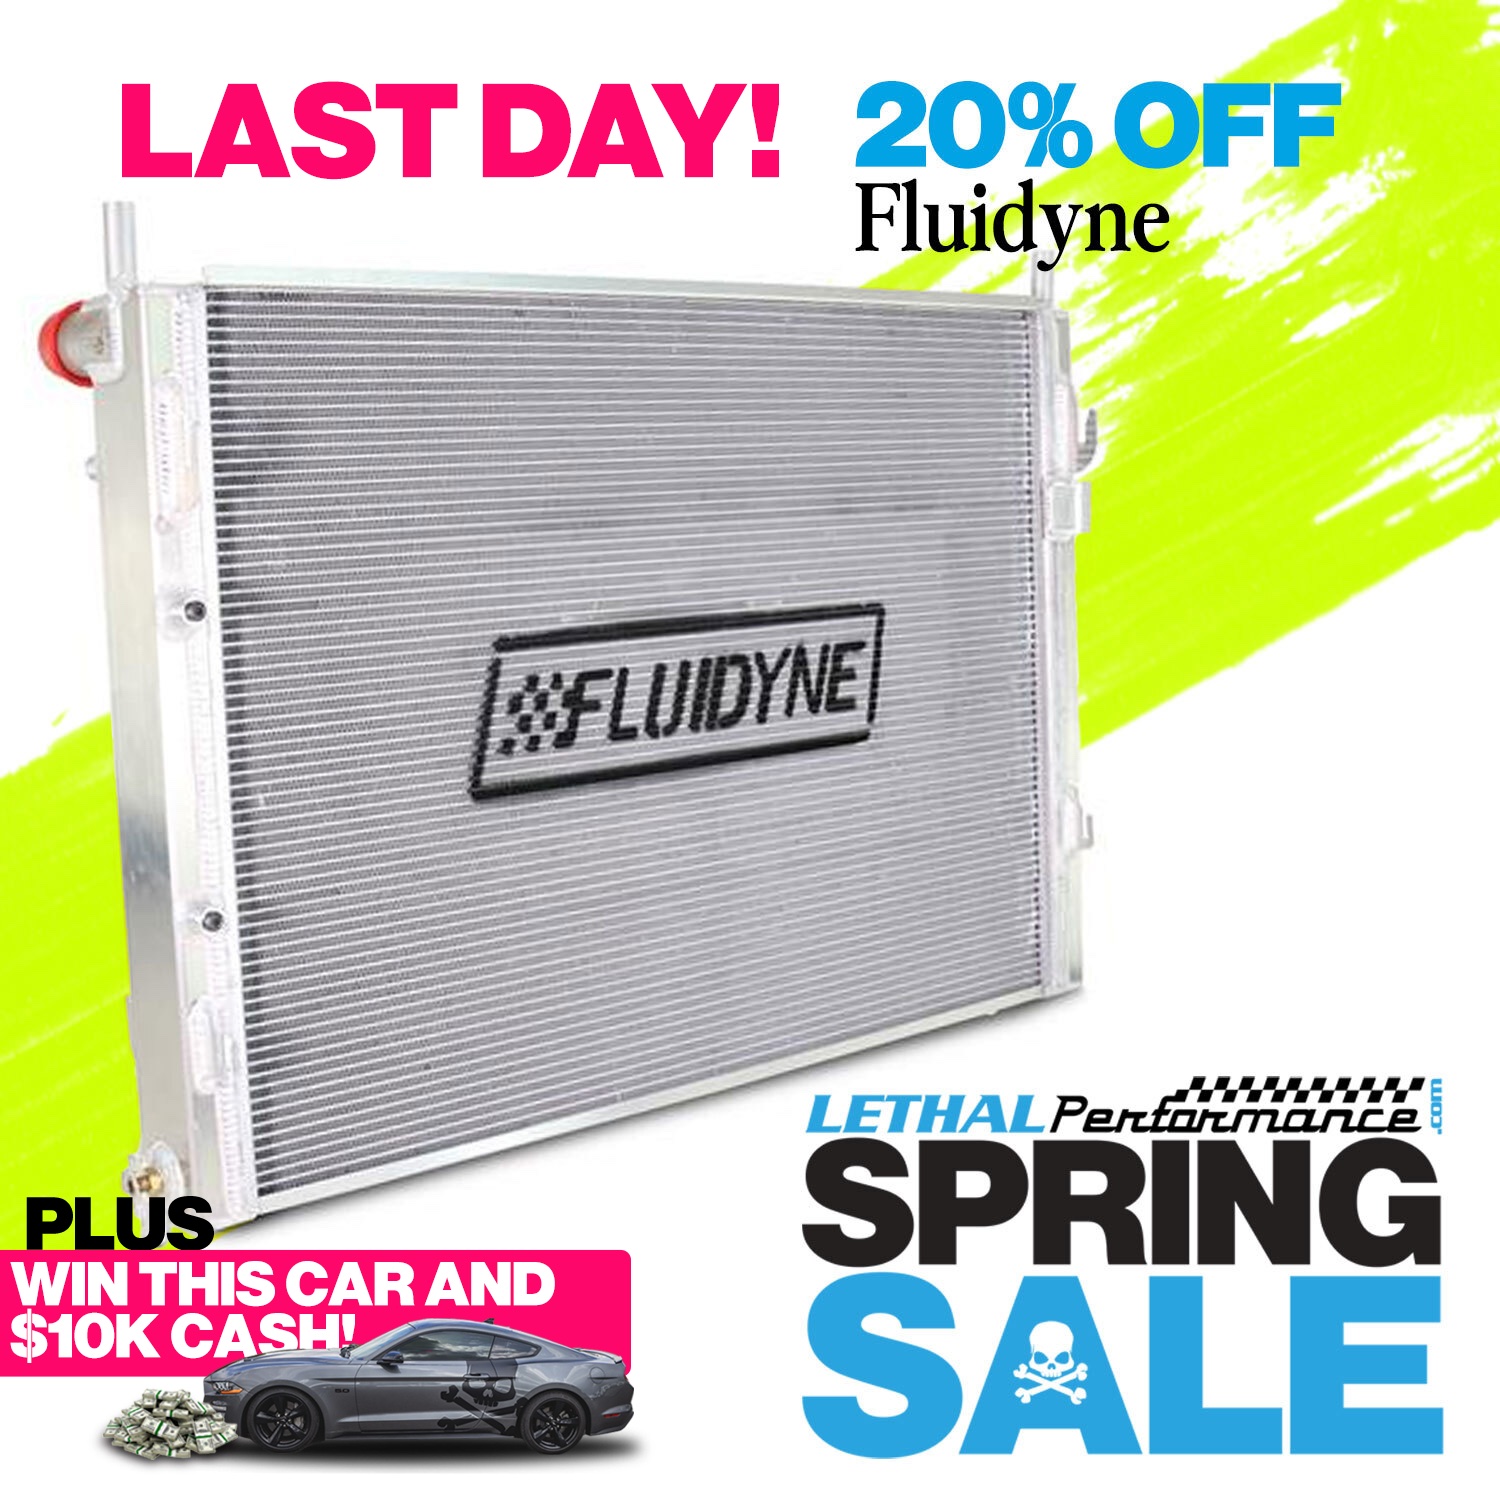 S650 Mustang Spring SALE has SPRUNG here at Lethal Performance!! last day fluidyne